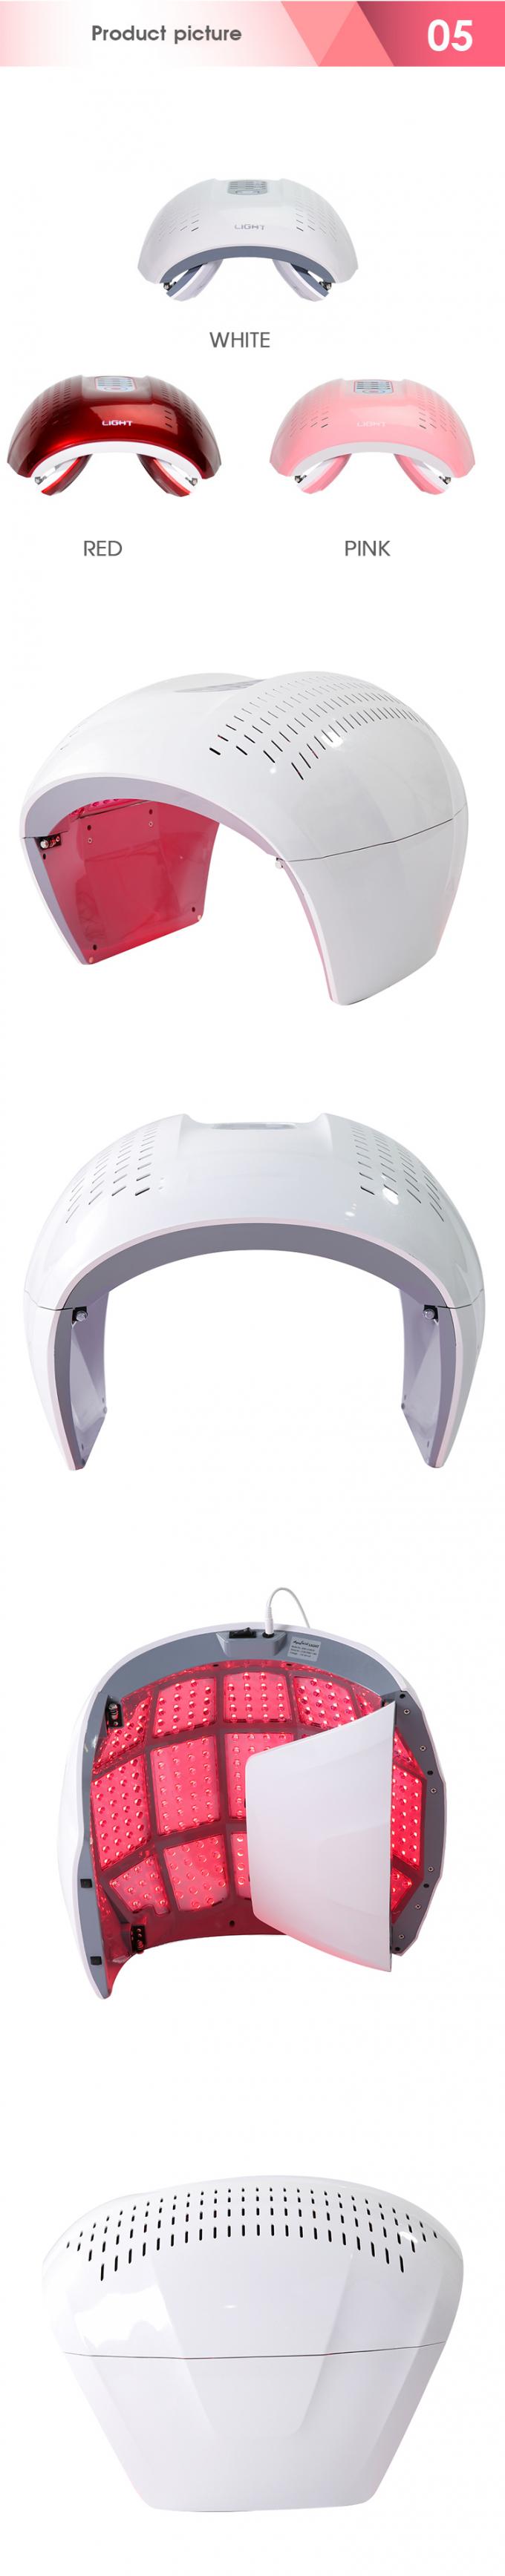 Anti Oxidation LED Light Therapy Face Mask , Professional Led Light Therapy Devices